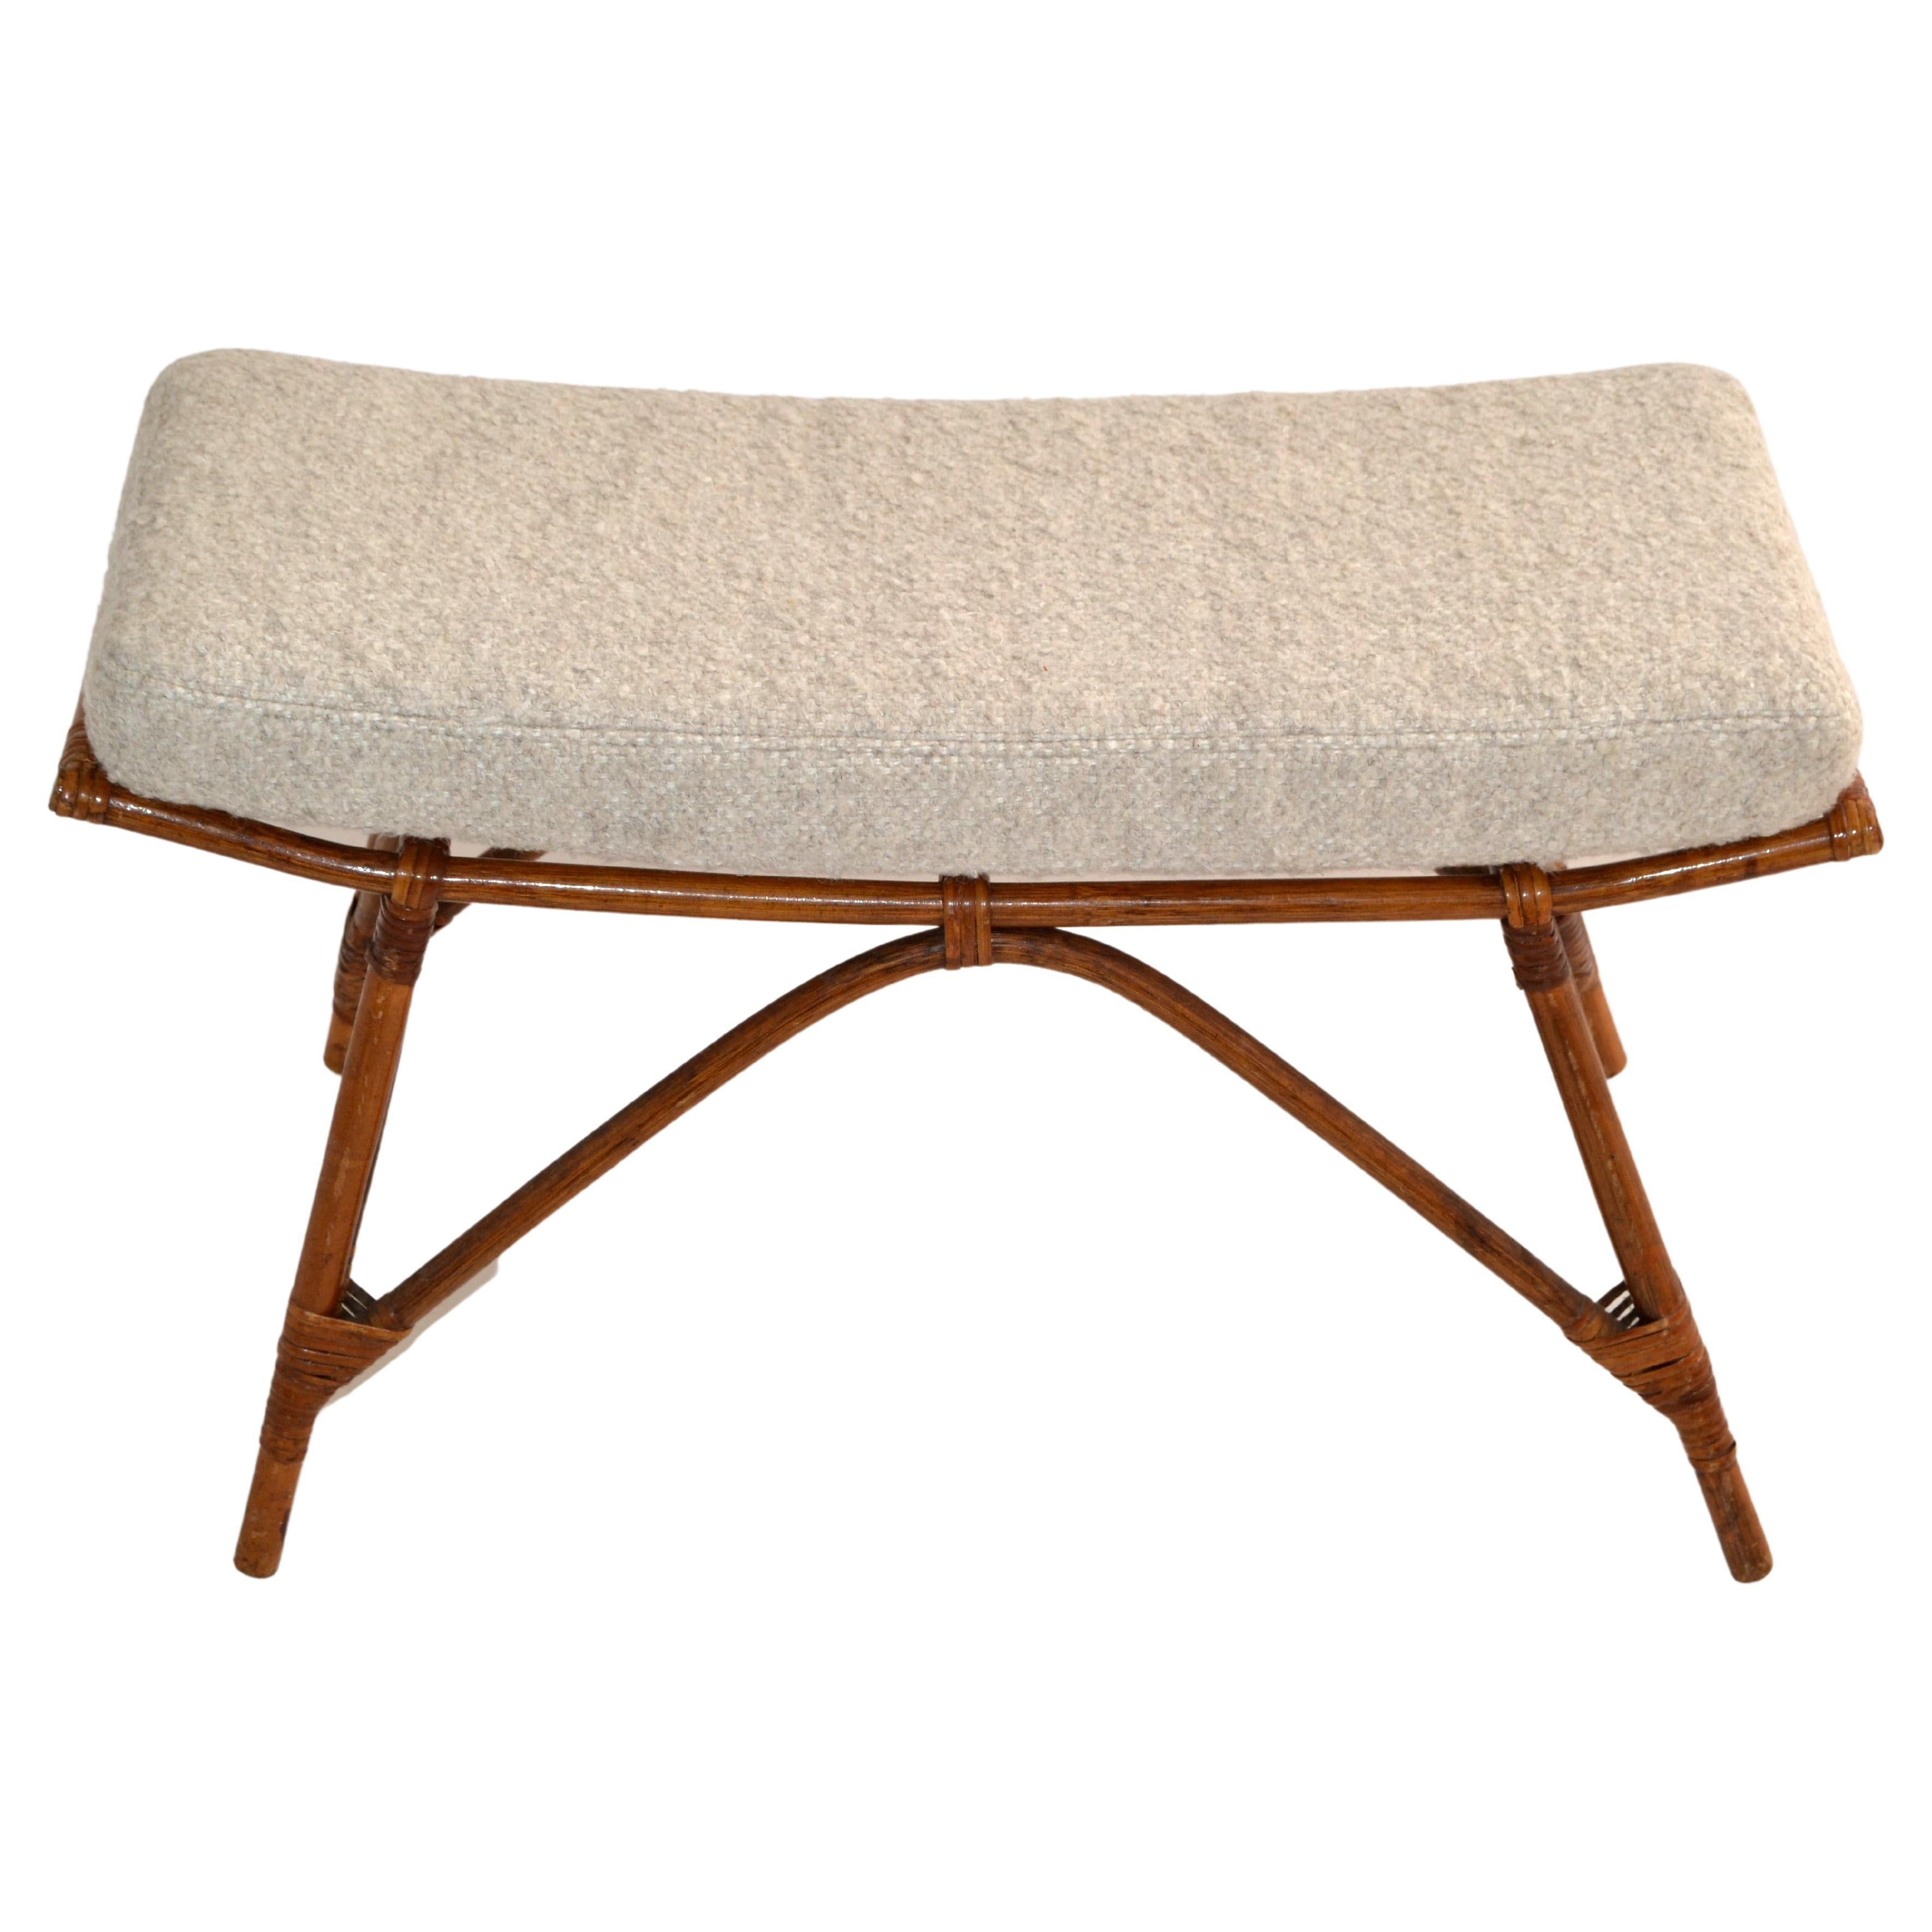 One Bohemian style Asian shaped bamboo bench in sand color wool Bouclé Basketweave upholstery with handwoven Cane Bindings.
Comes with removable Seat Cushion. 
Mid-Century Modern Design made in the late 20th Century in America.
In ready to use